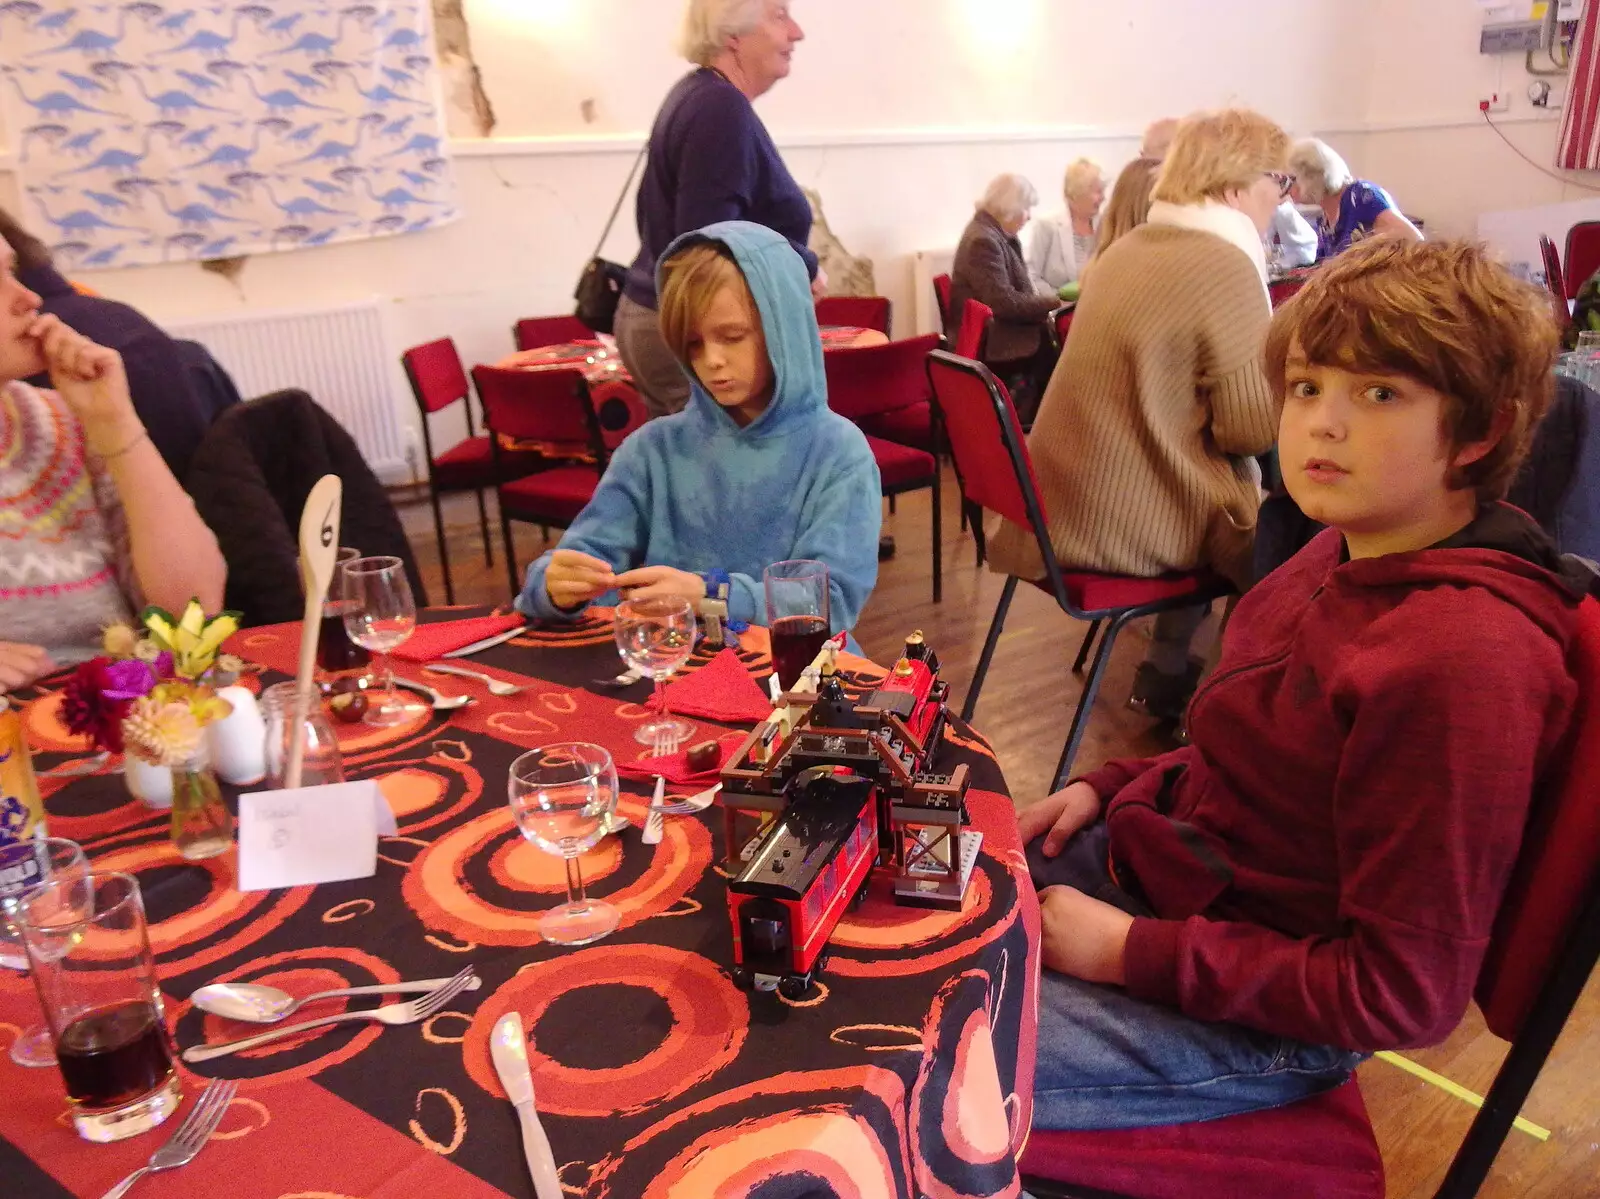 Fred looks up, with his Harry Potter Lego, from Sunday Lunch at the Village Hall, Brome, Suffolk - 10th October 2021